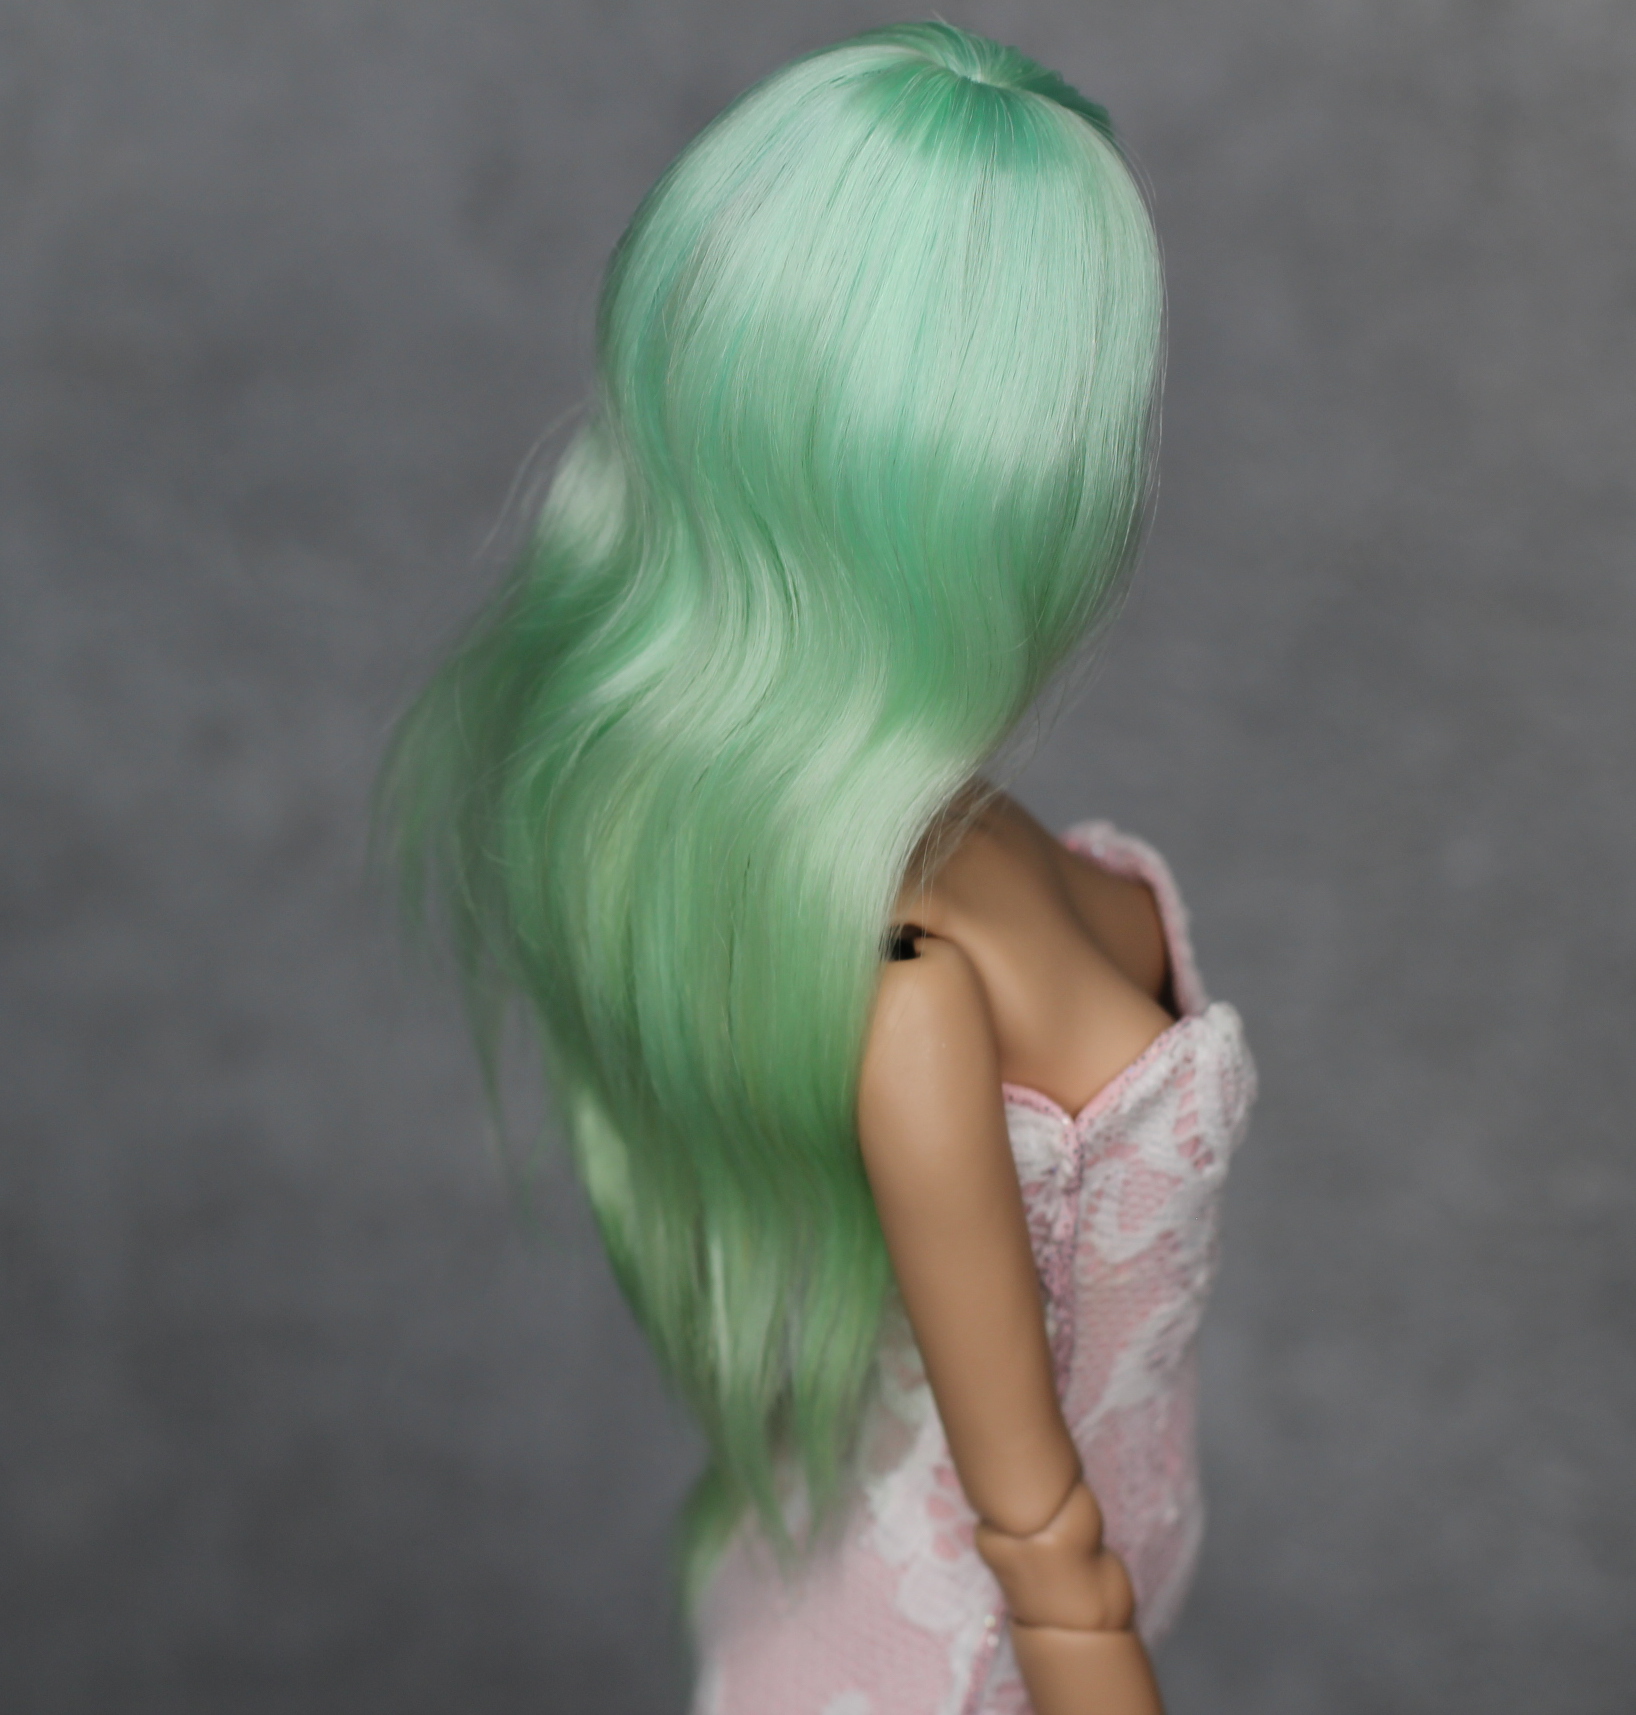 The wig is made by hand, especially for the Popovy sisters doll. Natural  Hair Wig (Angora Goat). The wig is made on an ac…